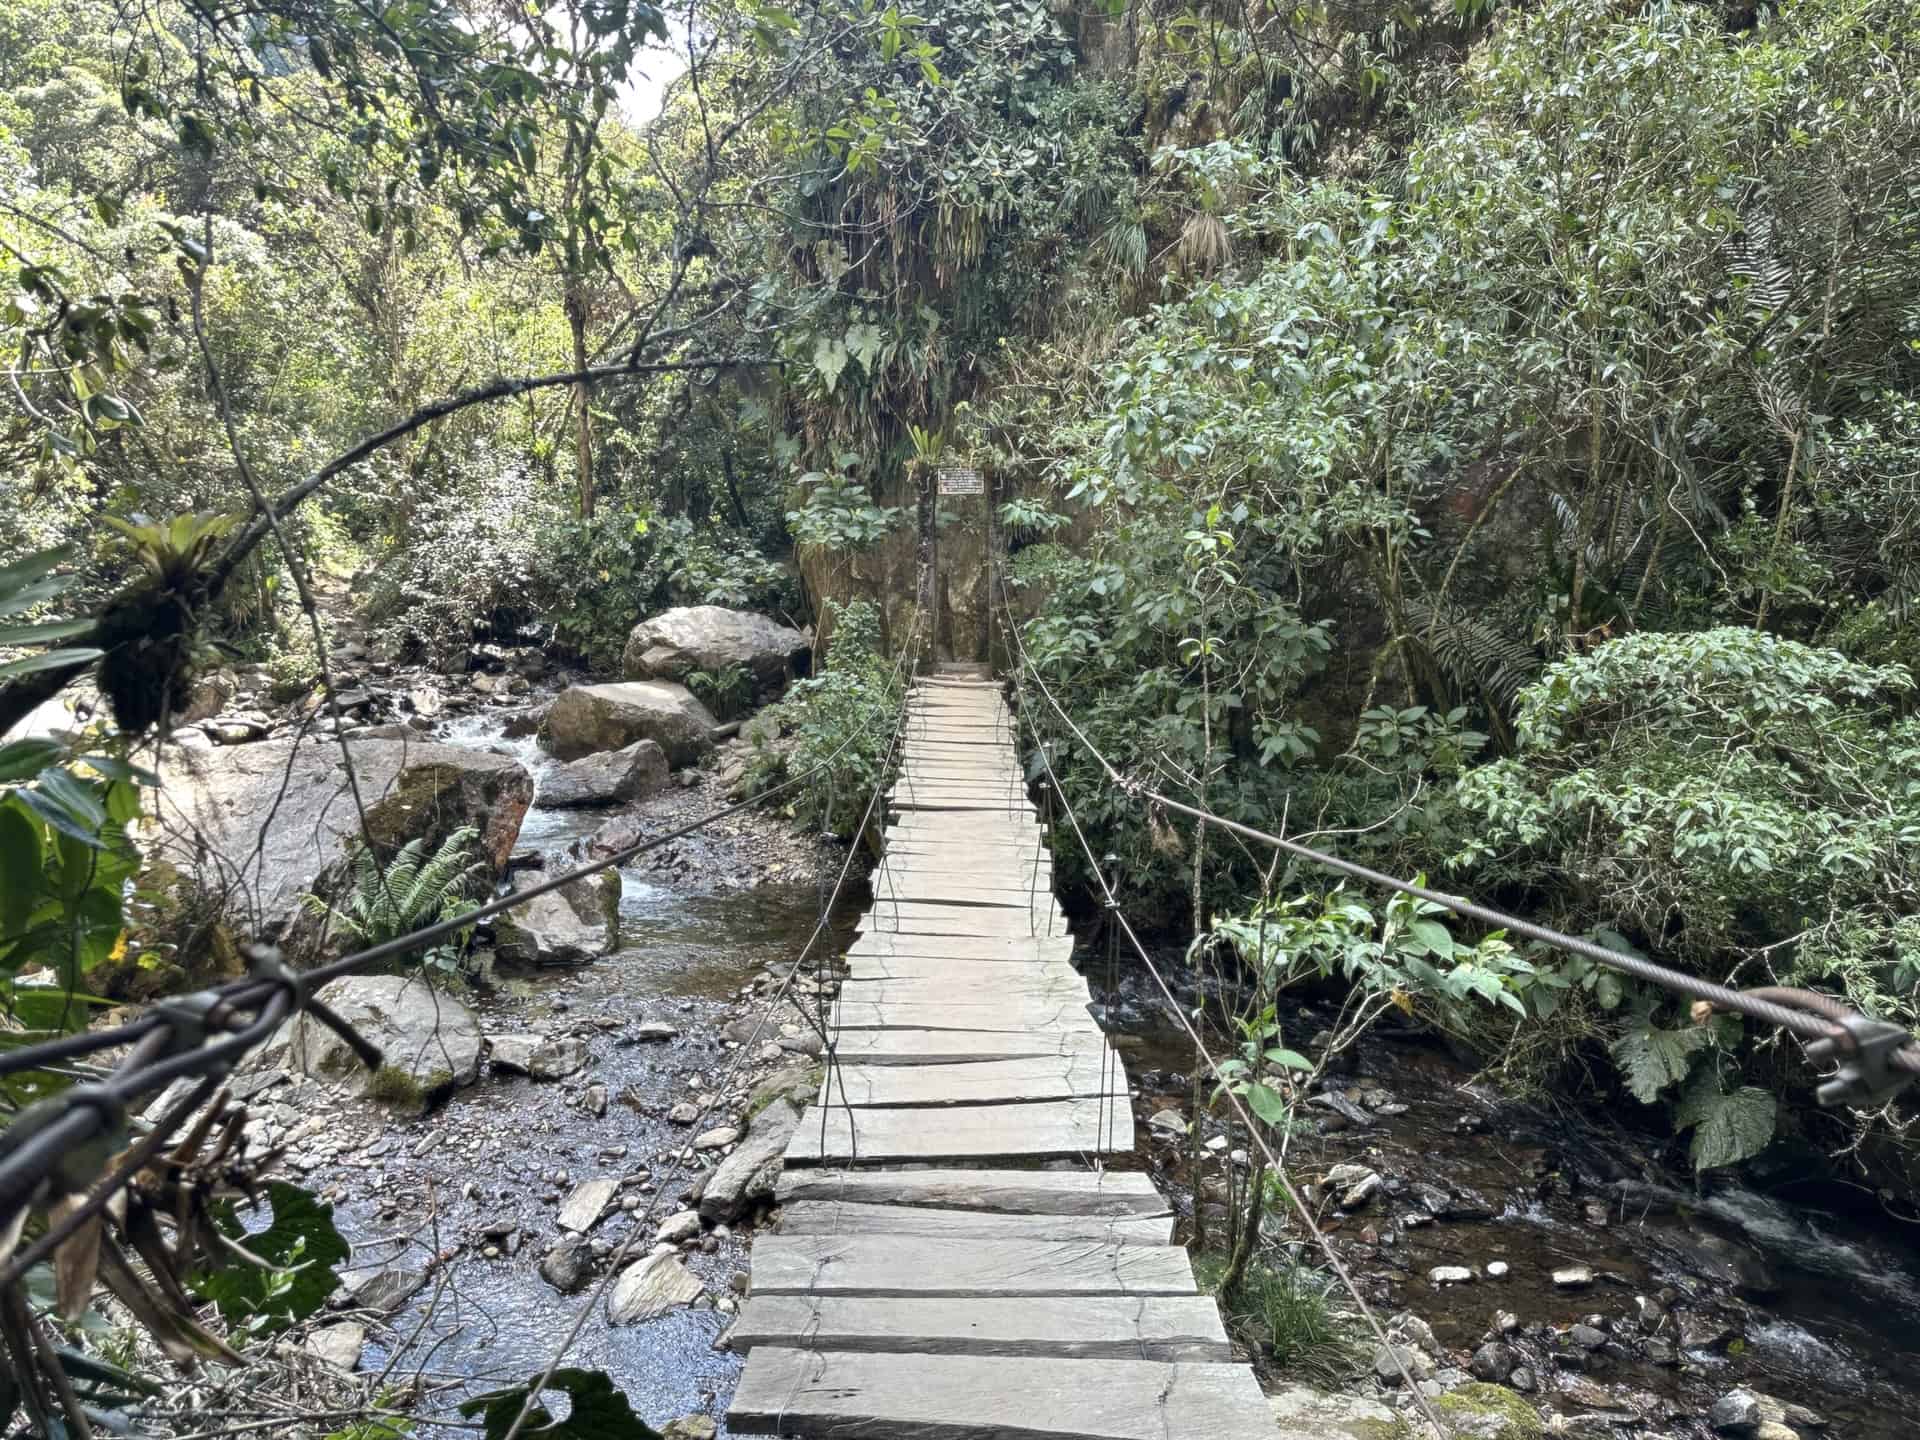 Looking across a bridge at Cocora Valley in Quindío, Colombia